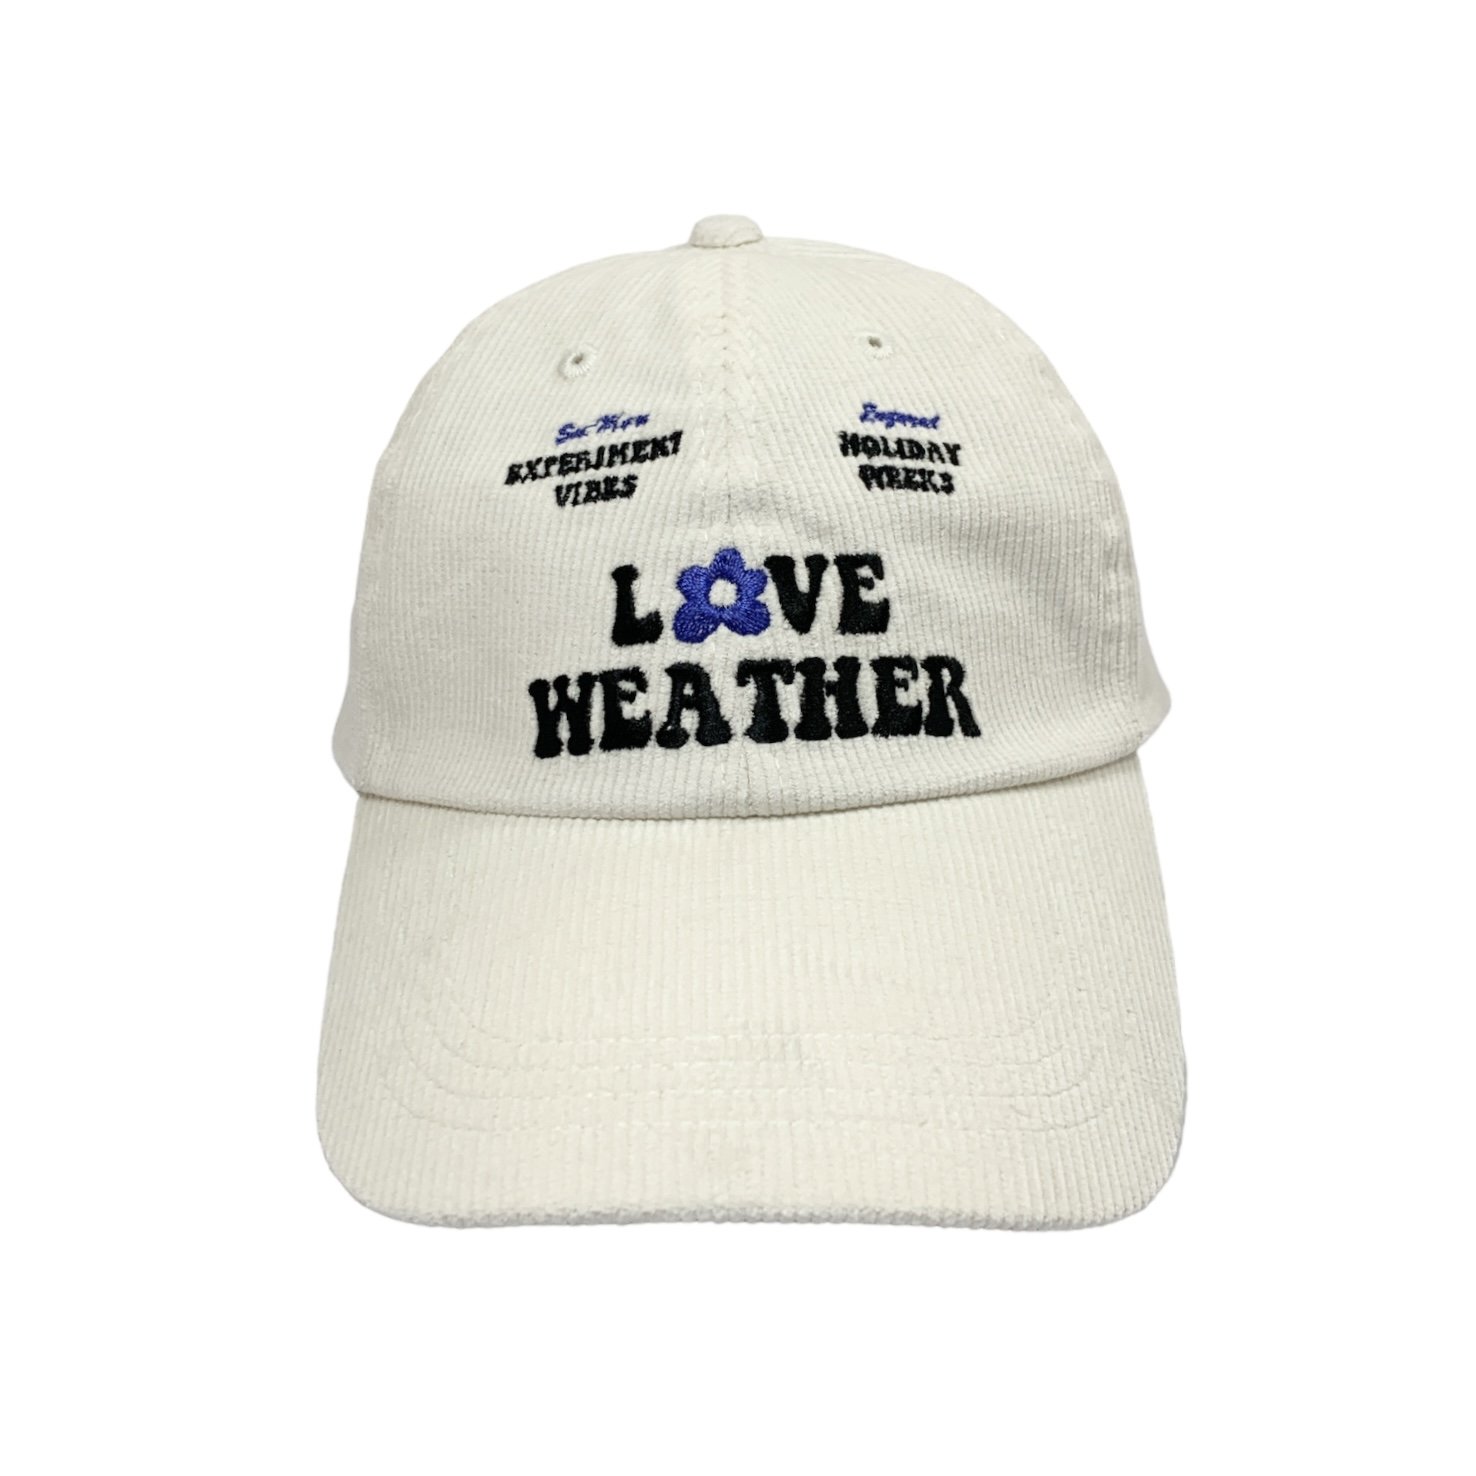 LOVE WEATHER CAP IN WHITE